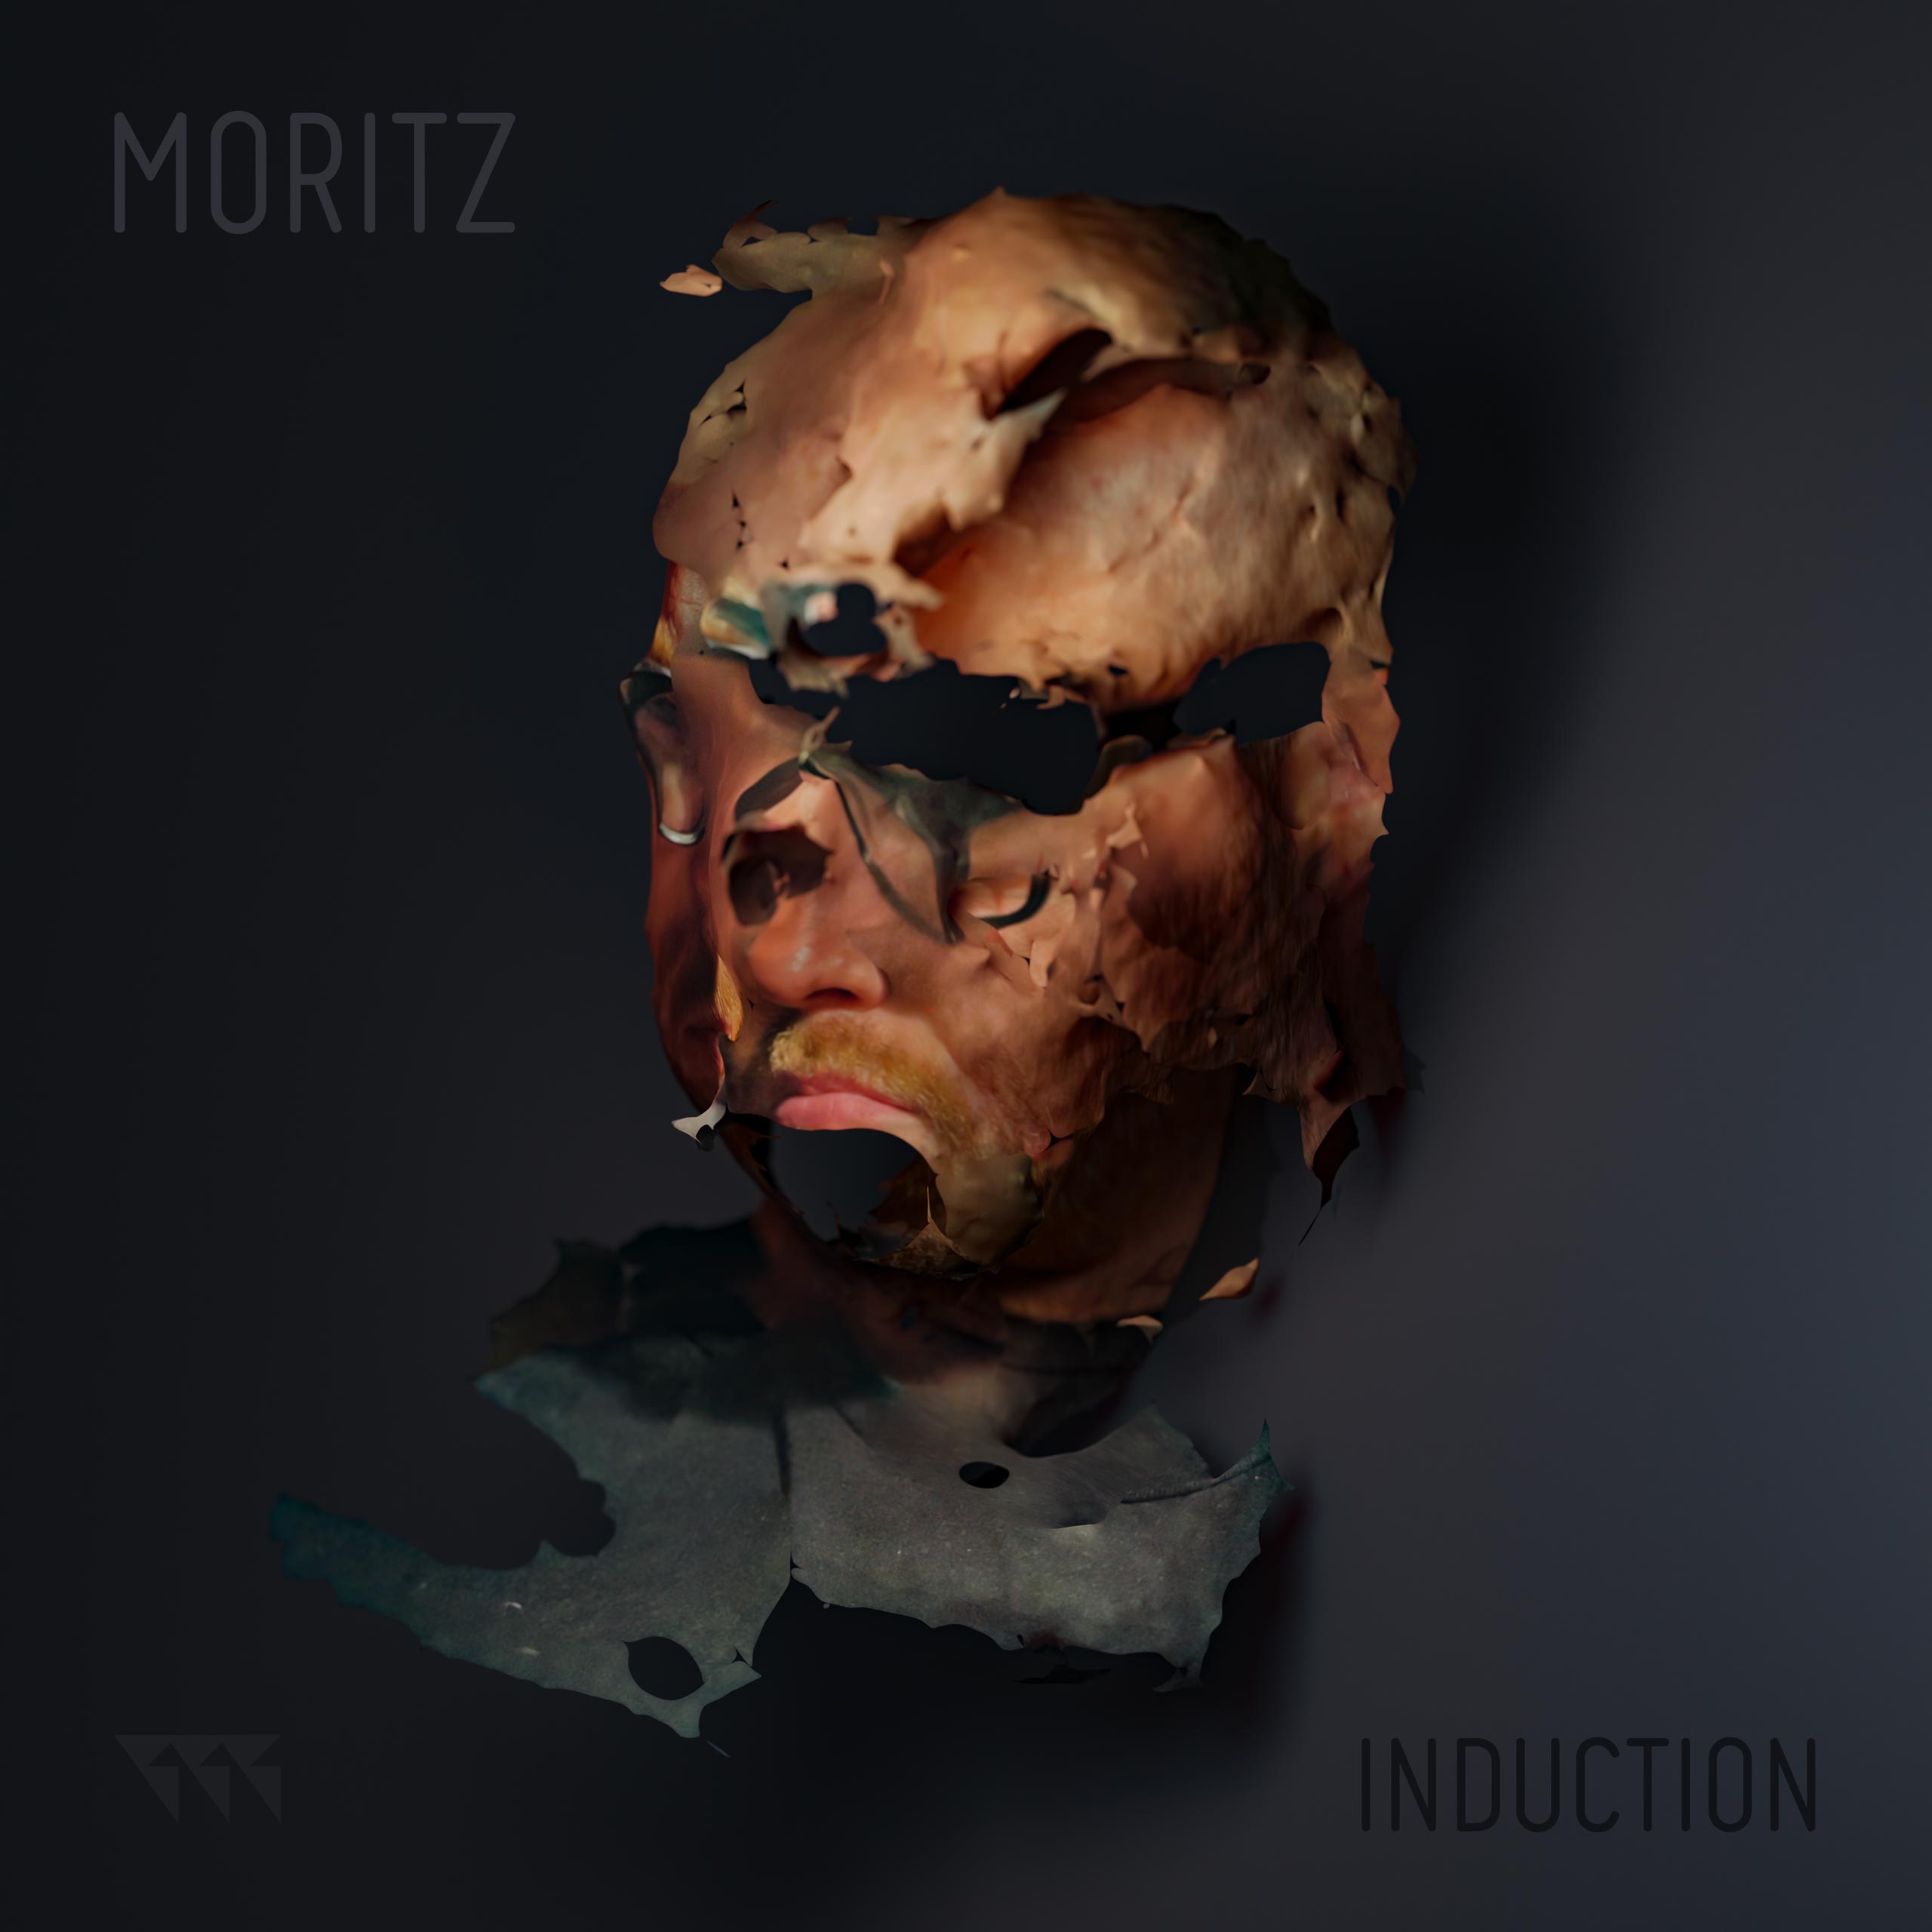 Moritz Induction Cover